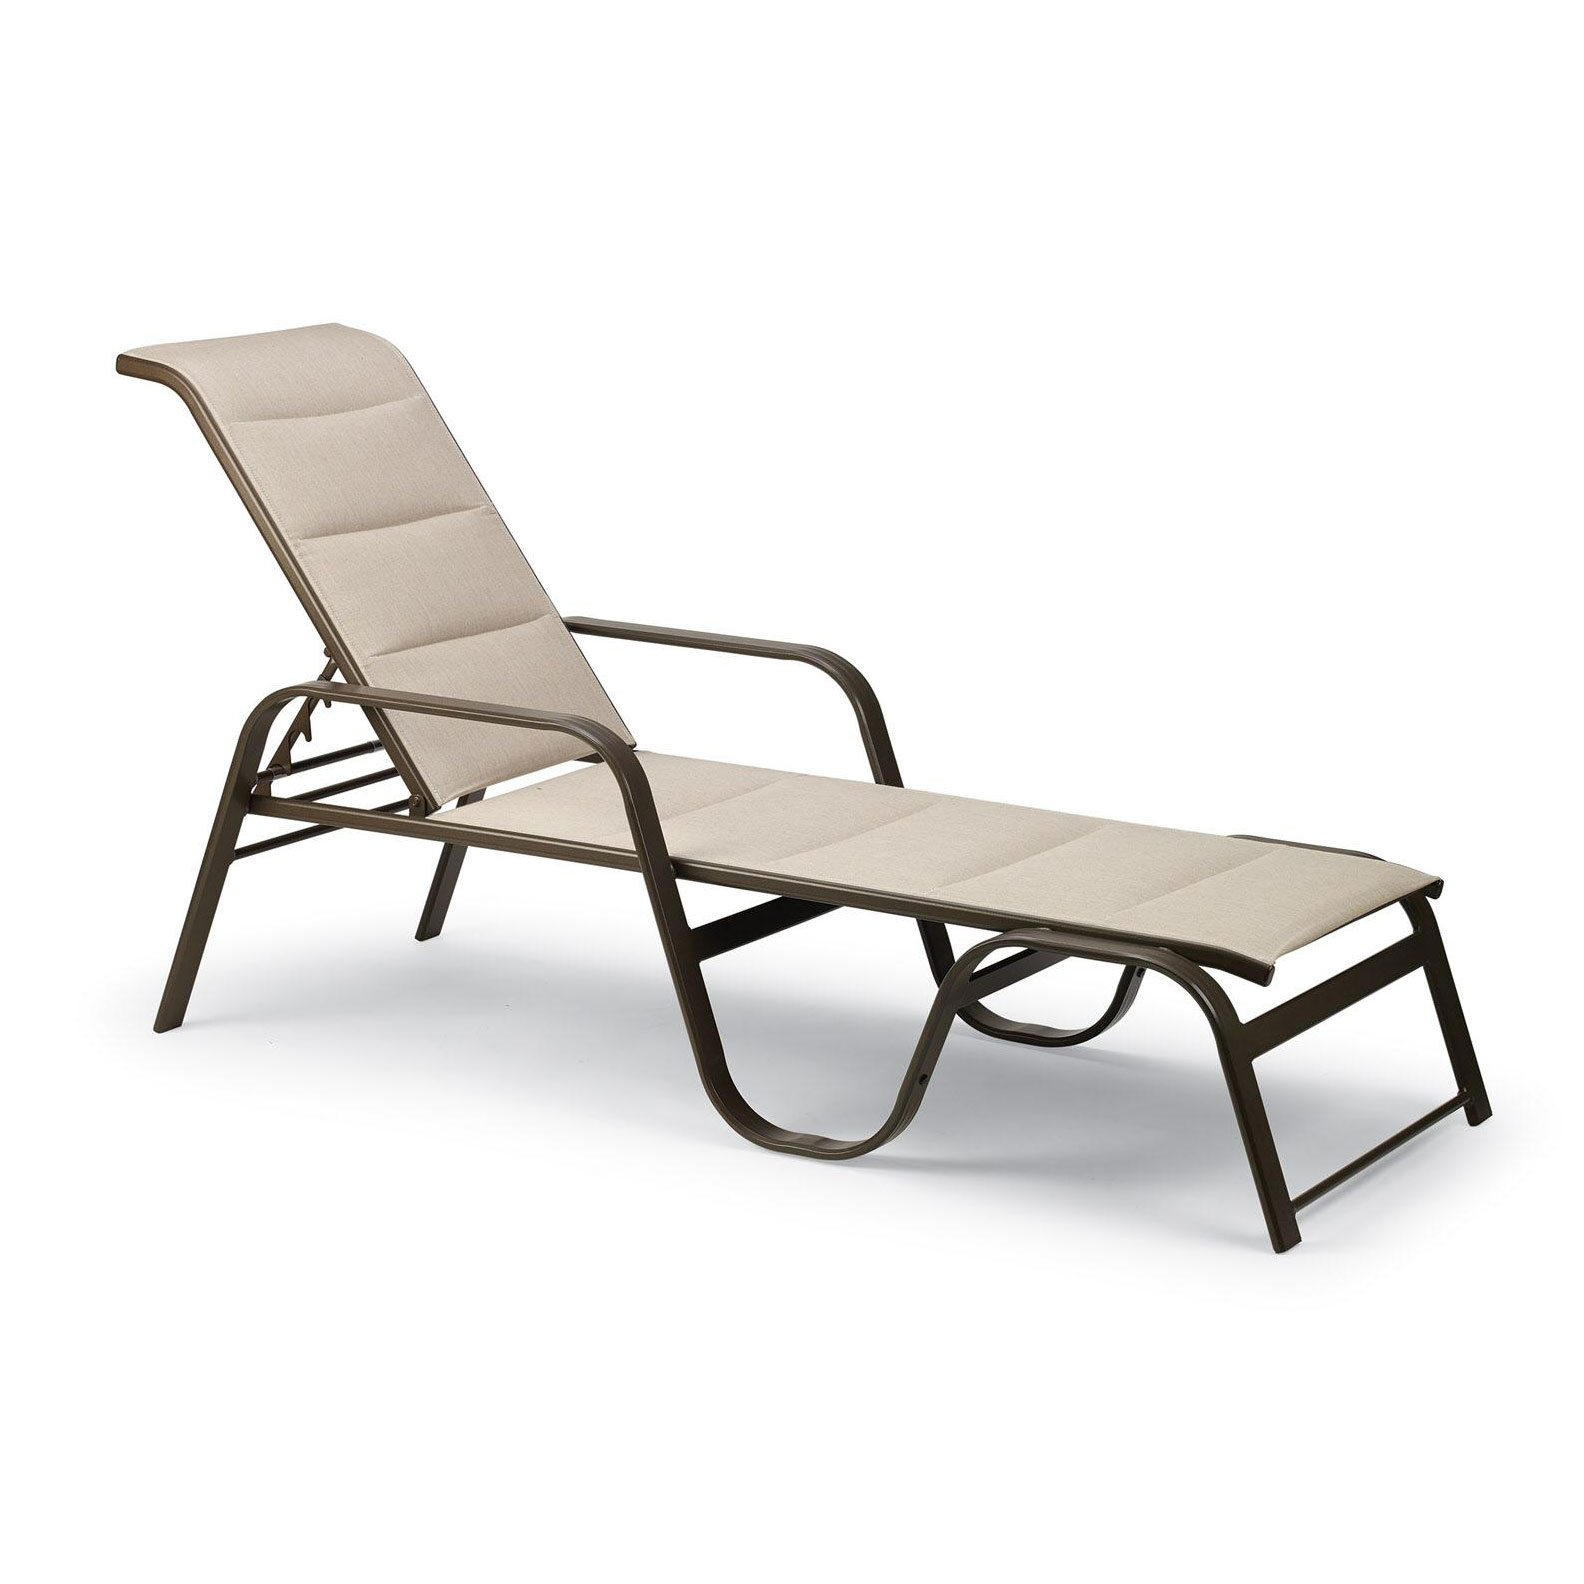 Key West Padded Sling Stacking Chaise